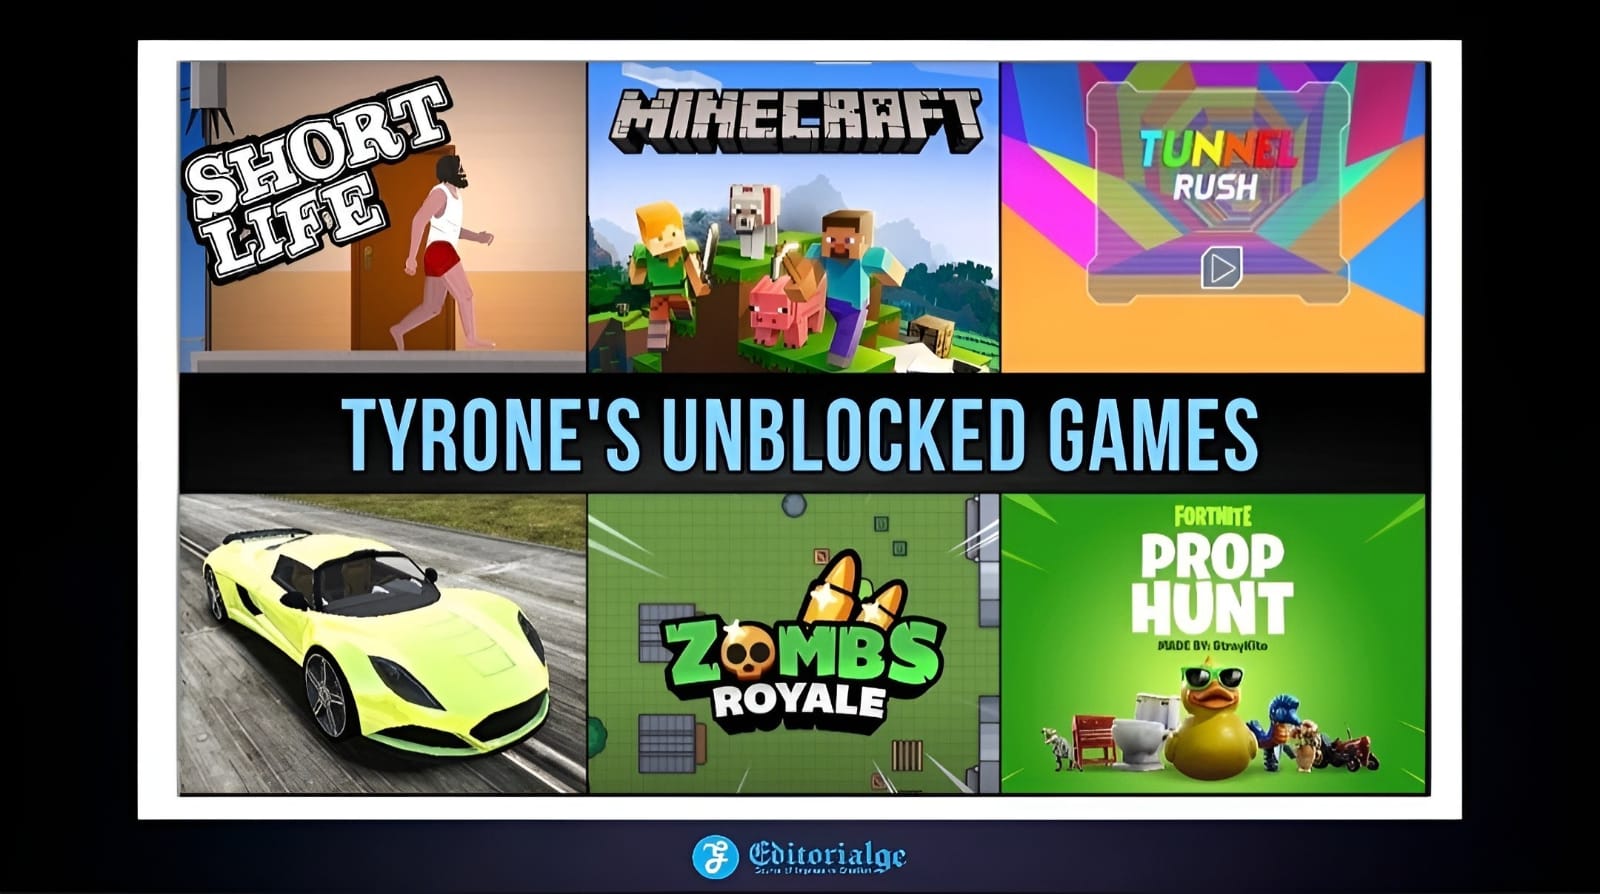 Experience Top 230 Fun and Free Gaming at Tyrone's Unblocked Games